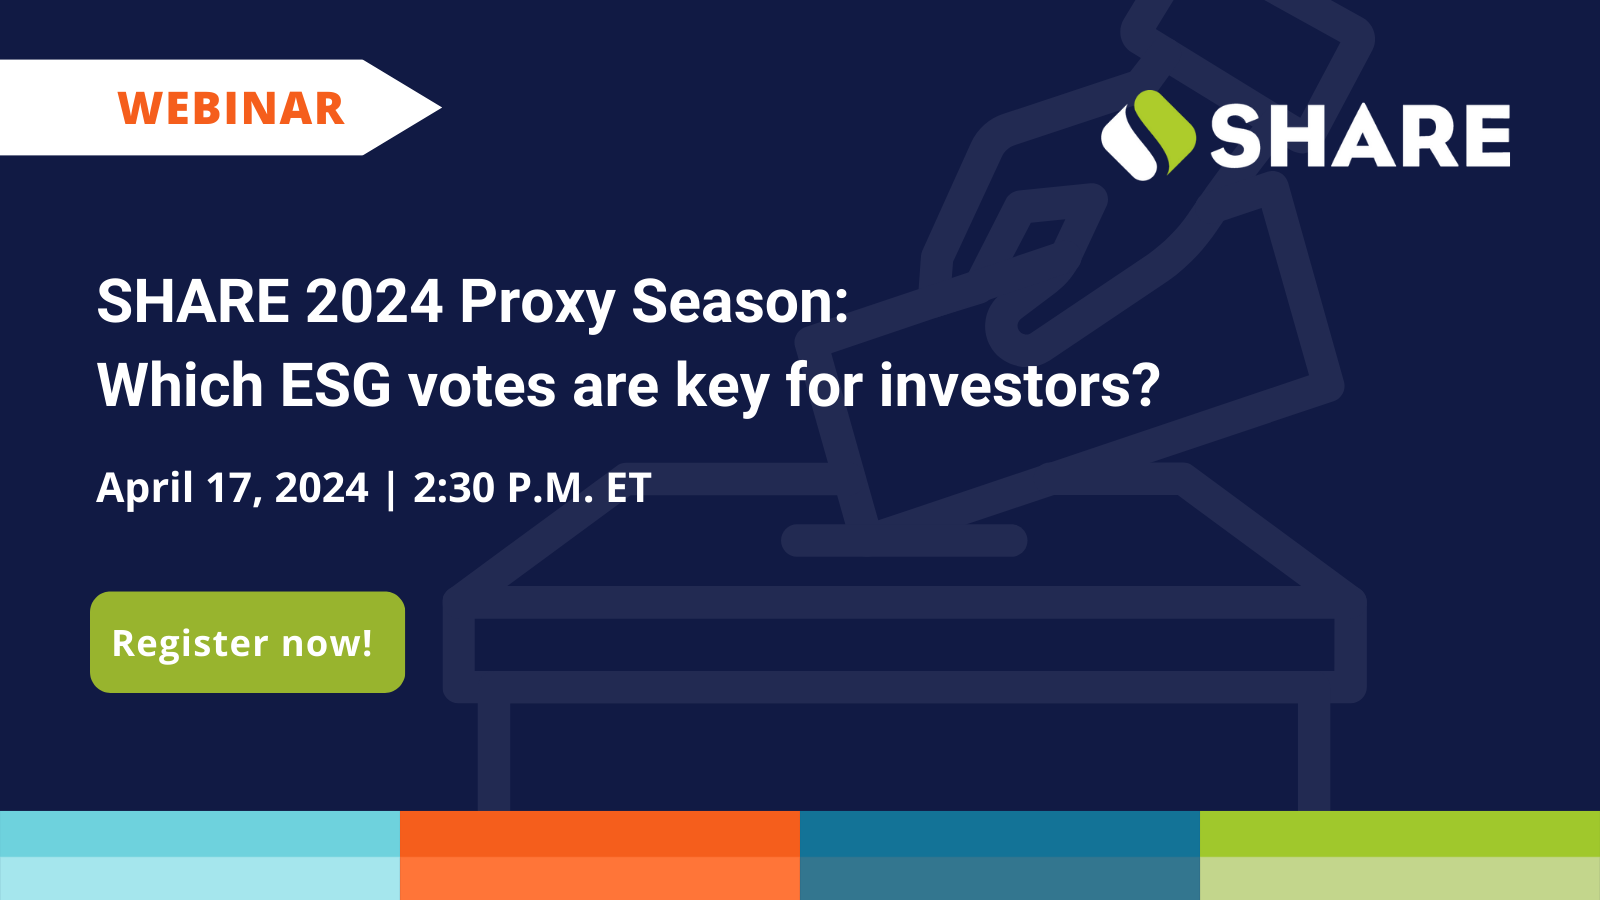 A graphic showing details of the SHARE Proxy Season Webinar 2024, taking place April 17 at 2:30 p.m. ET.